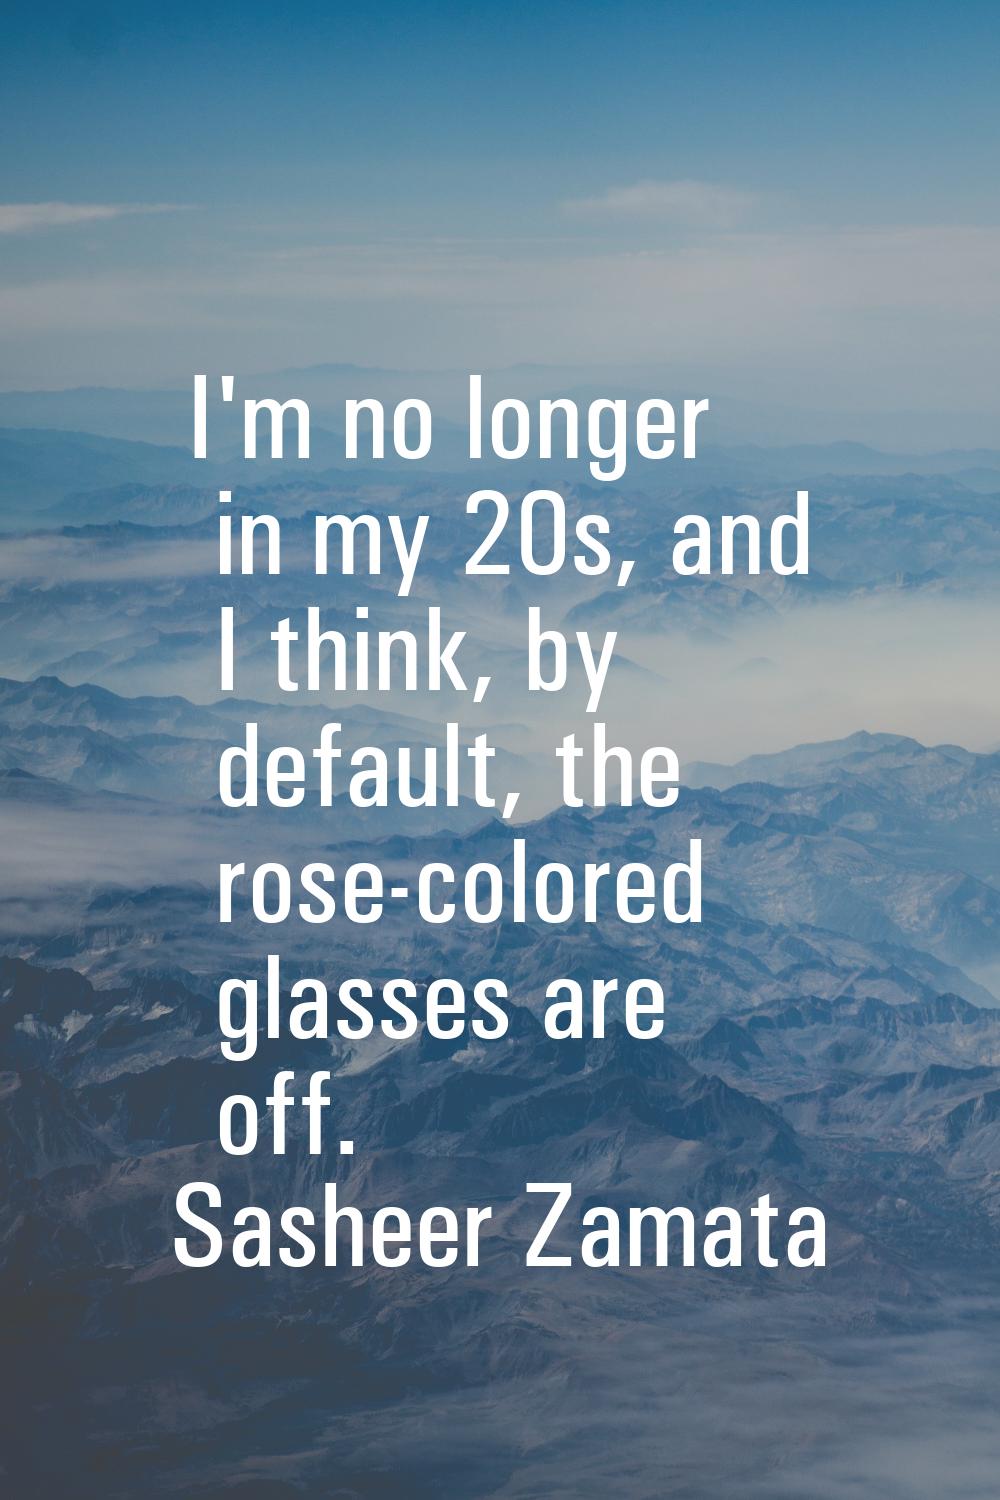 I'm no longer in my 20s, and I think, by default, the rose-colored glasses are off.